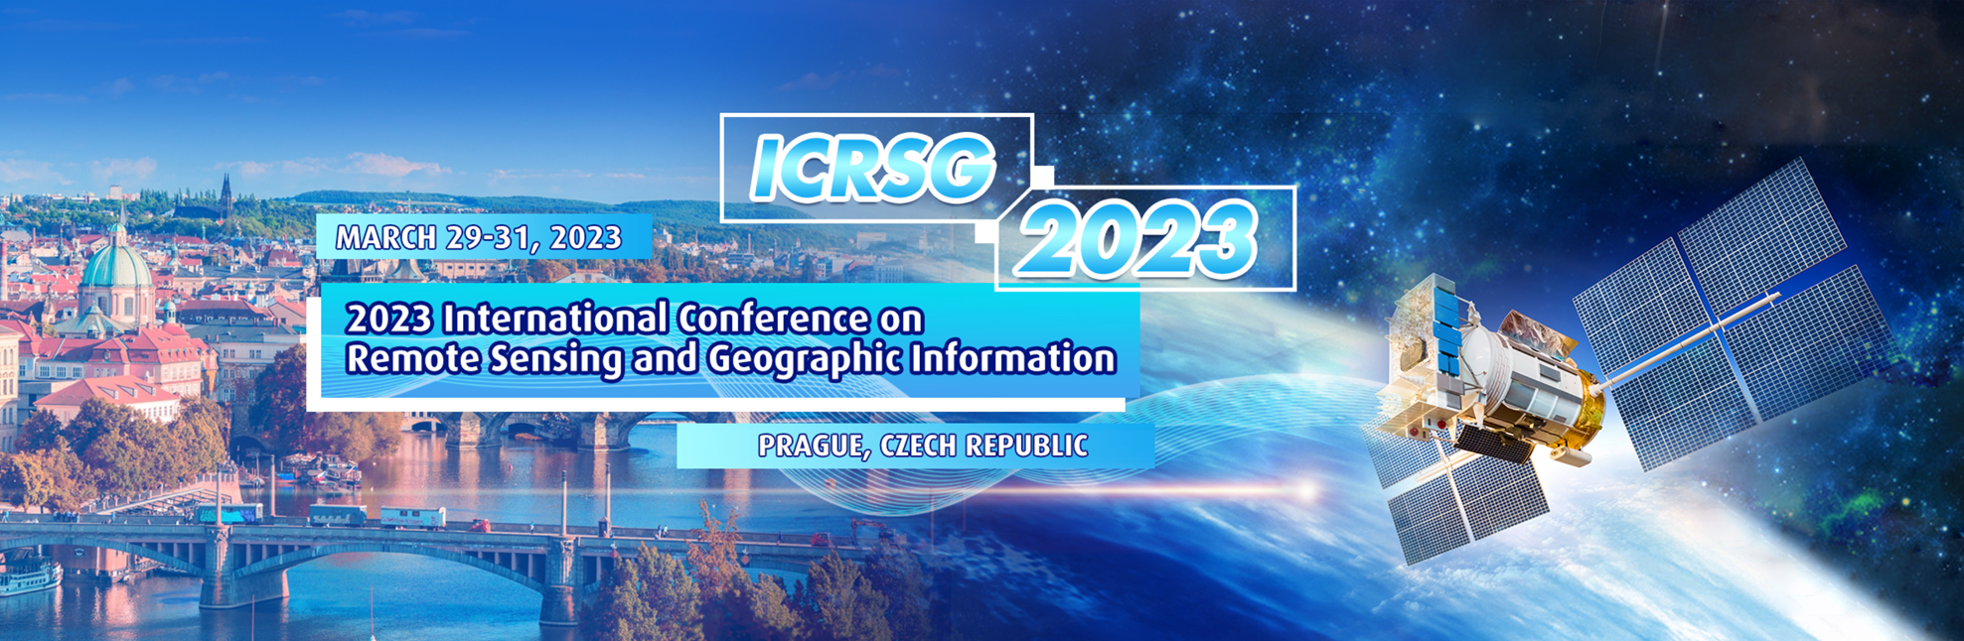 ICRSG | 2023 International Conference on Remote Sensing and Geographic Information